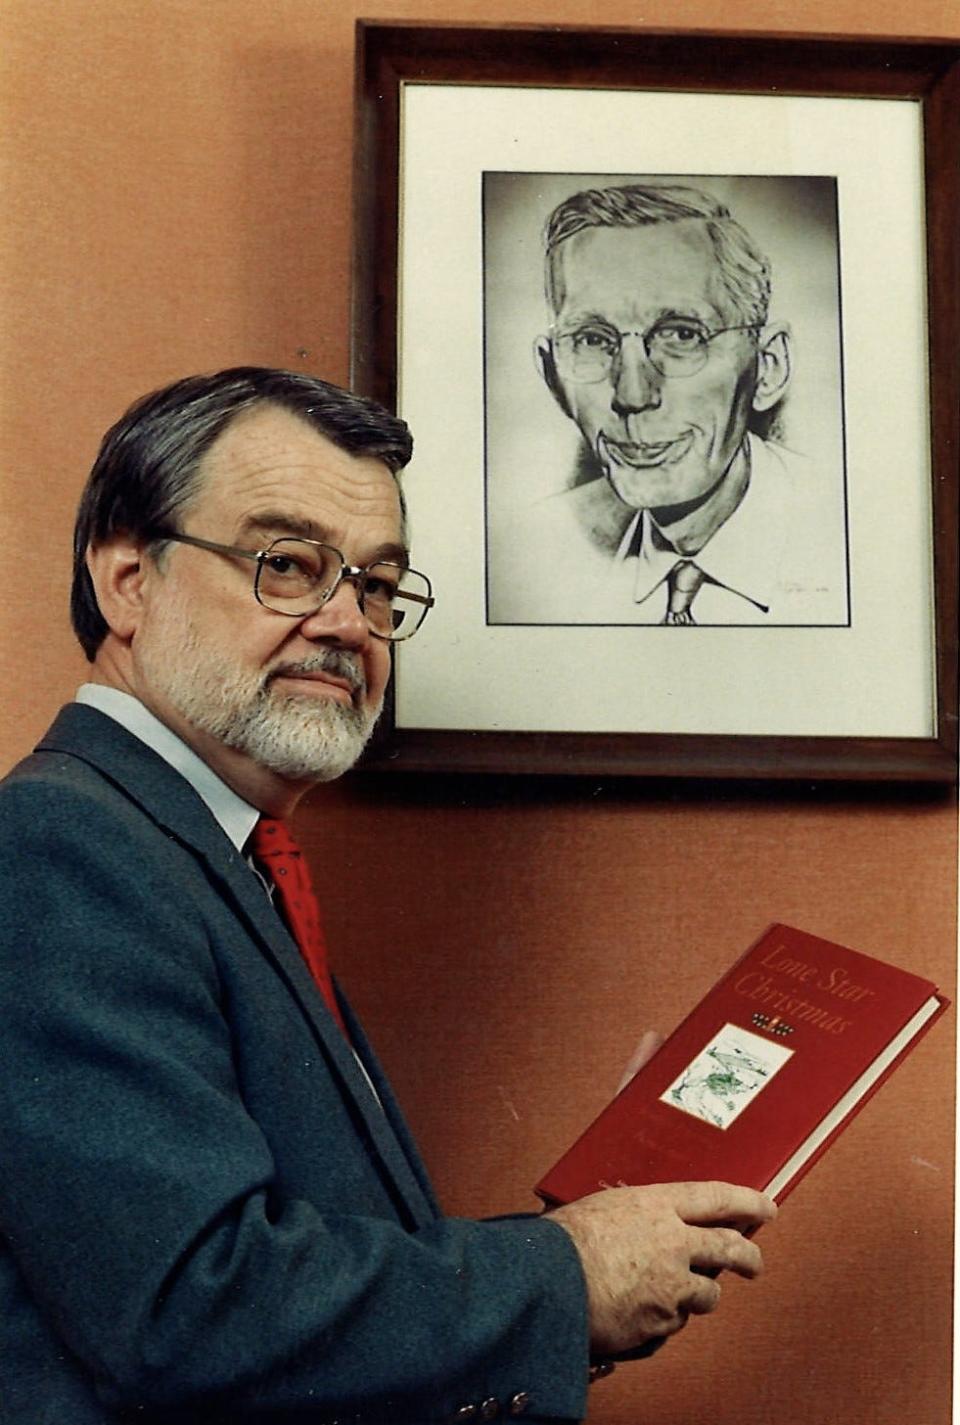 Charlie Marler with a collection of seasonal editorials by longtime Reporter-News editor Frank Grimes, in 1989.